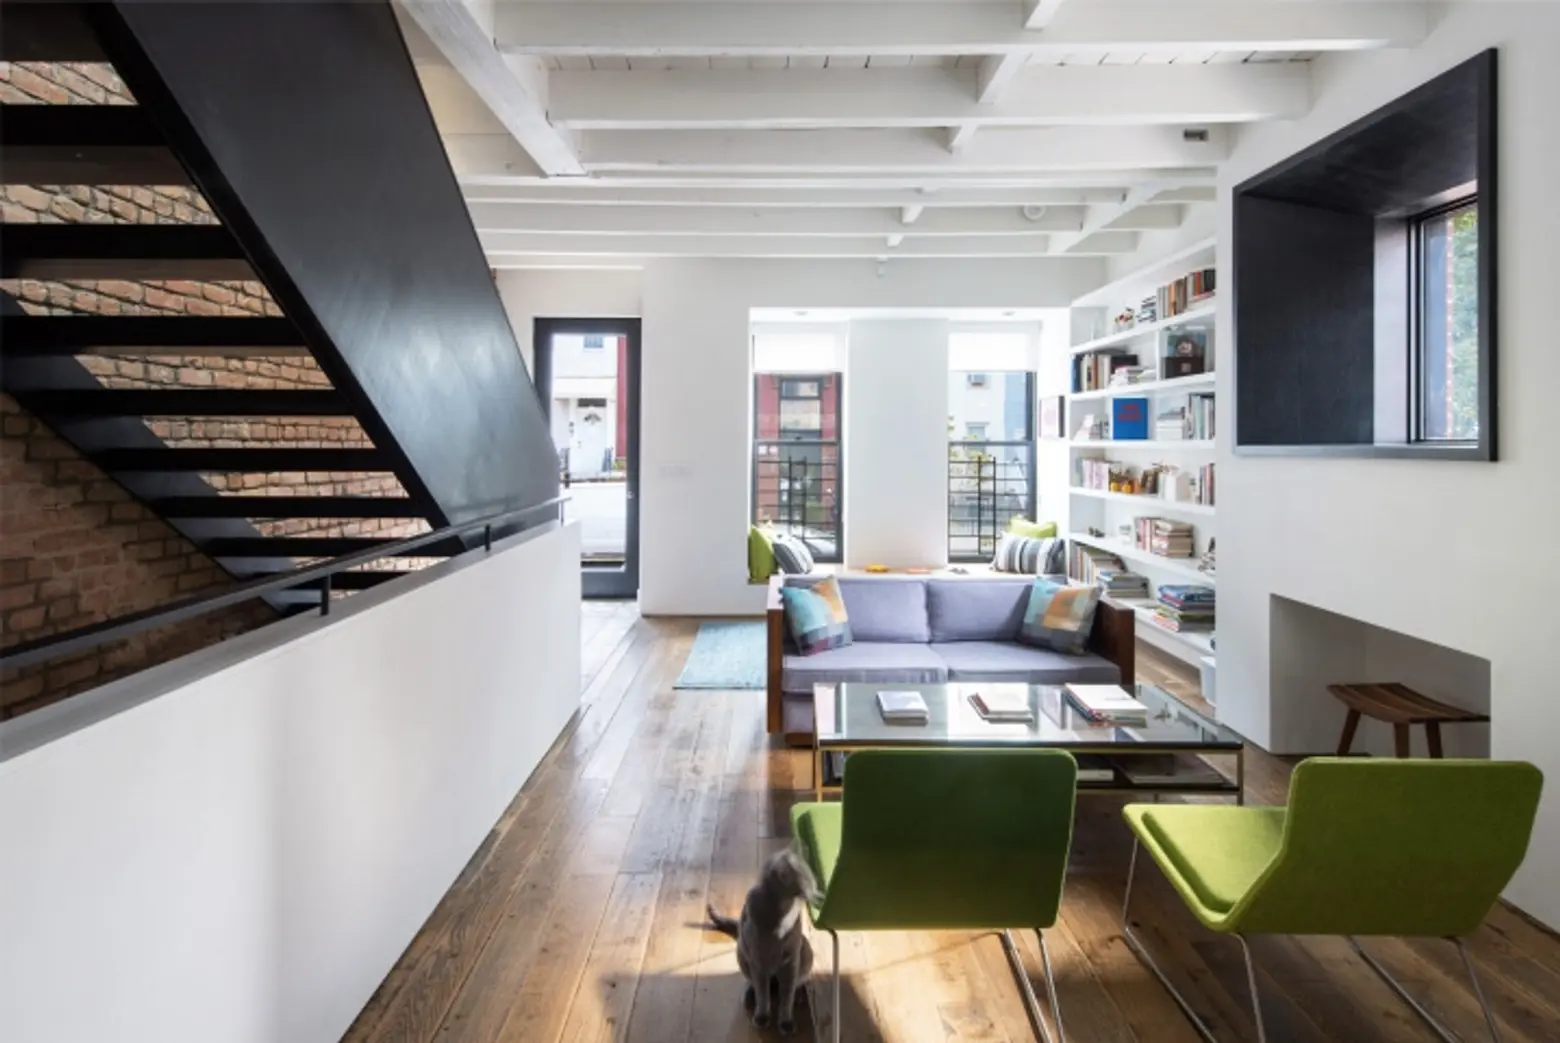 Margarita McGrath, Scott Oliver, noroof architects, tiny apartments, tiny living, micro housing, interior design for small apartments, tiny homes, tiny apartments nyc, interior design ideas for tiny apartments, nyc architects, brooklyn architects